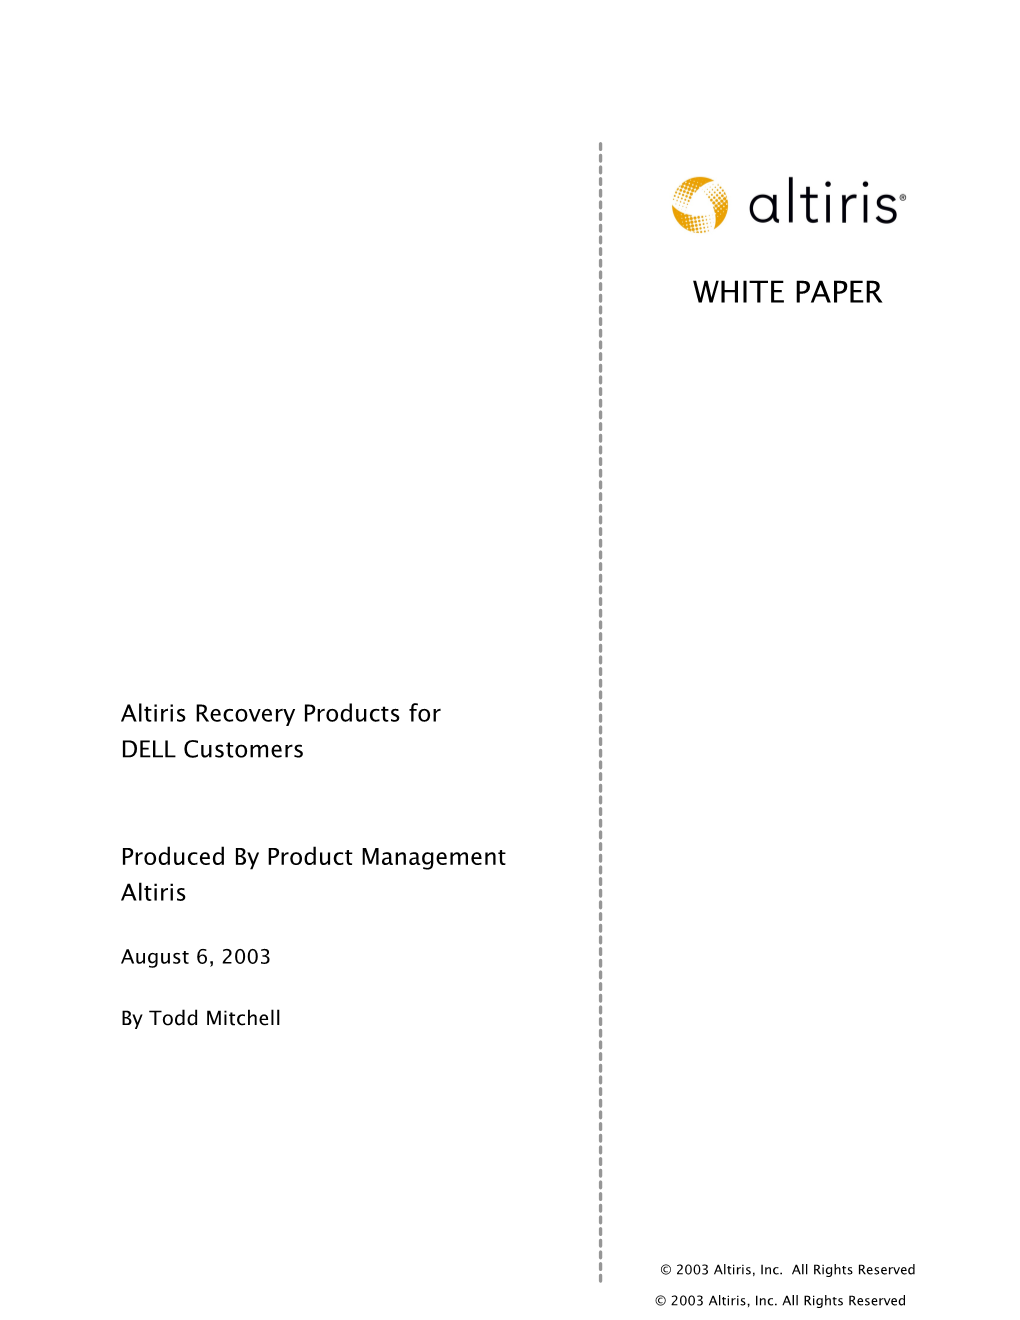 Altiris Recovery Solution 5.7 Page 6